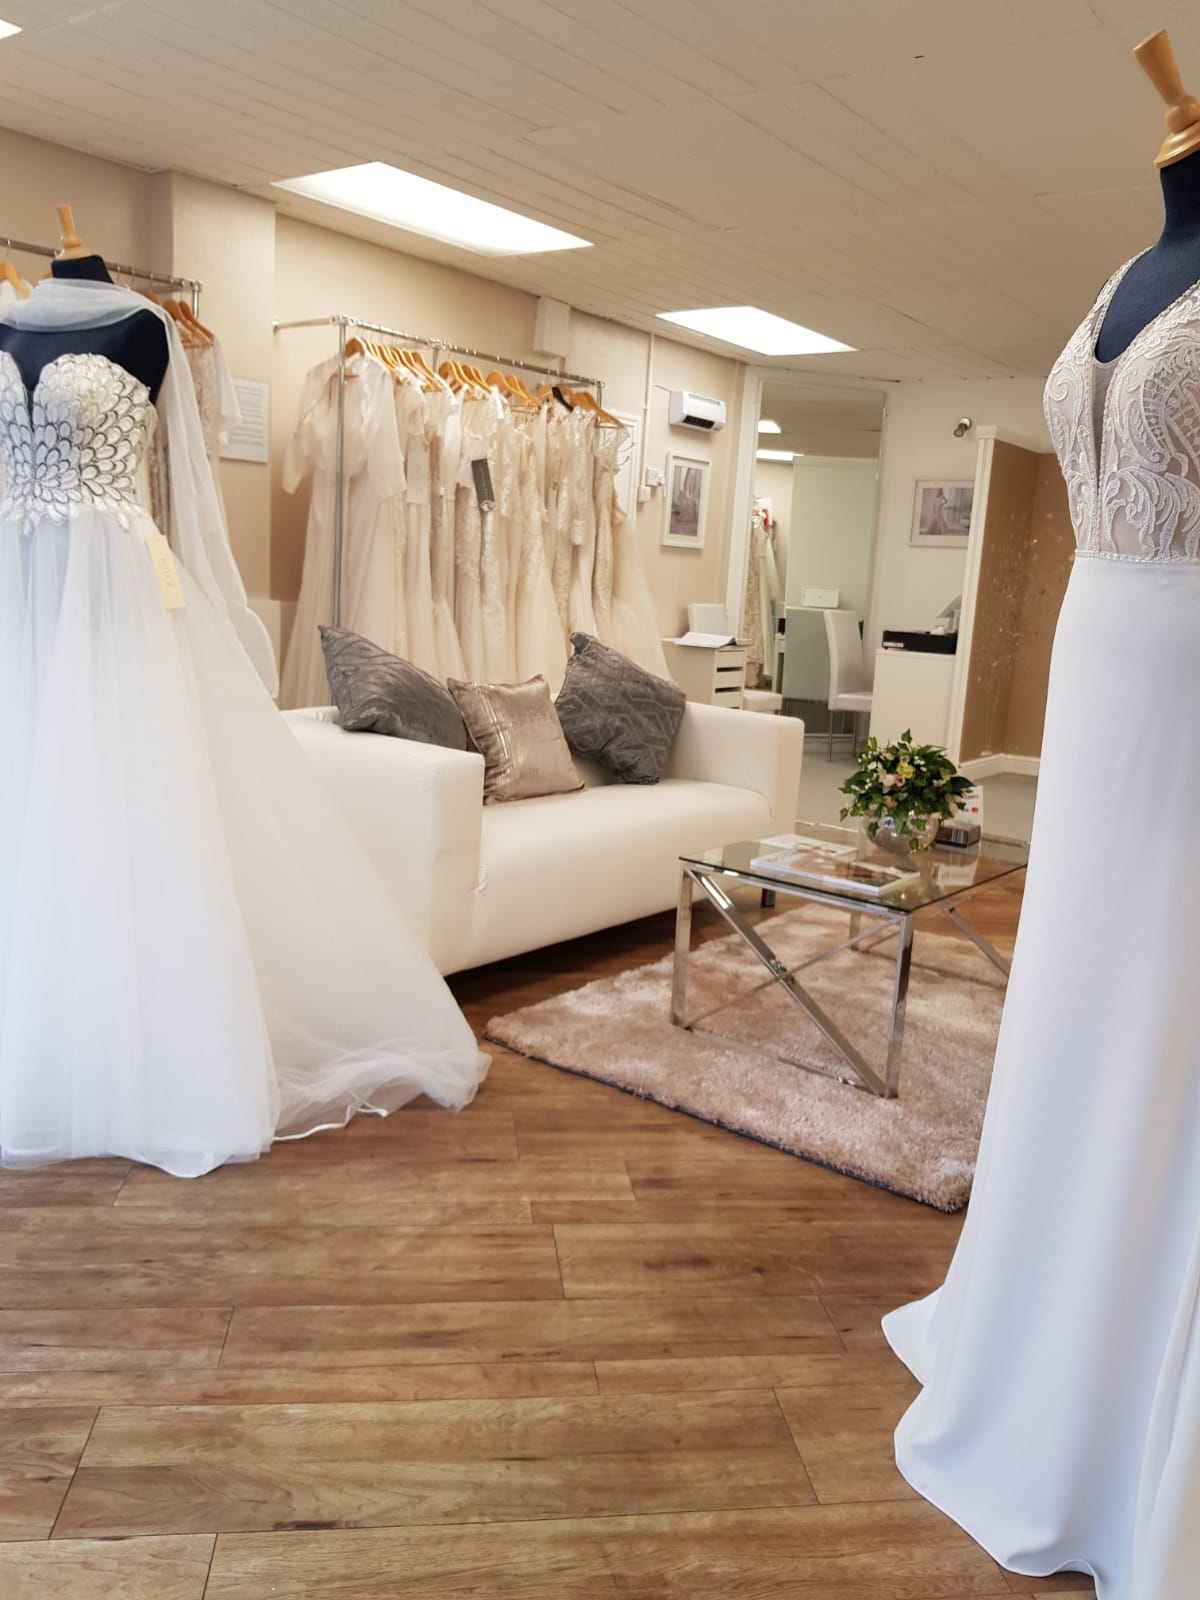 Newcastle's Simply Wed Bridal’s spacious waiting room complete with glass coffee table, pink rug, cream sofa, cushions, mannequins and wedding dresses neatly hung on a rail